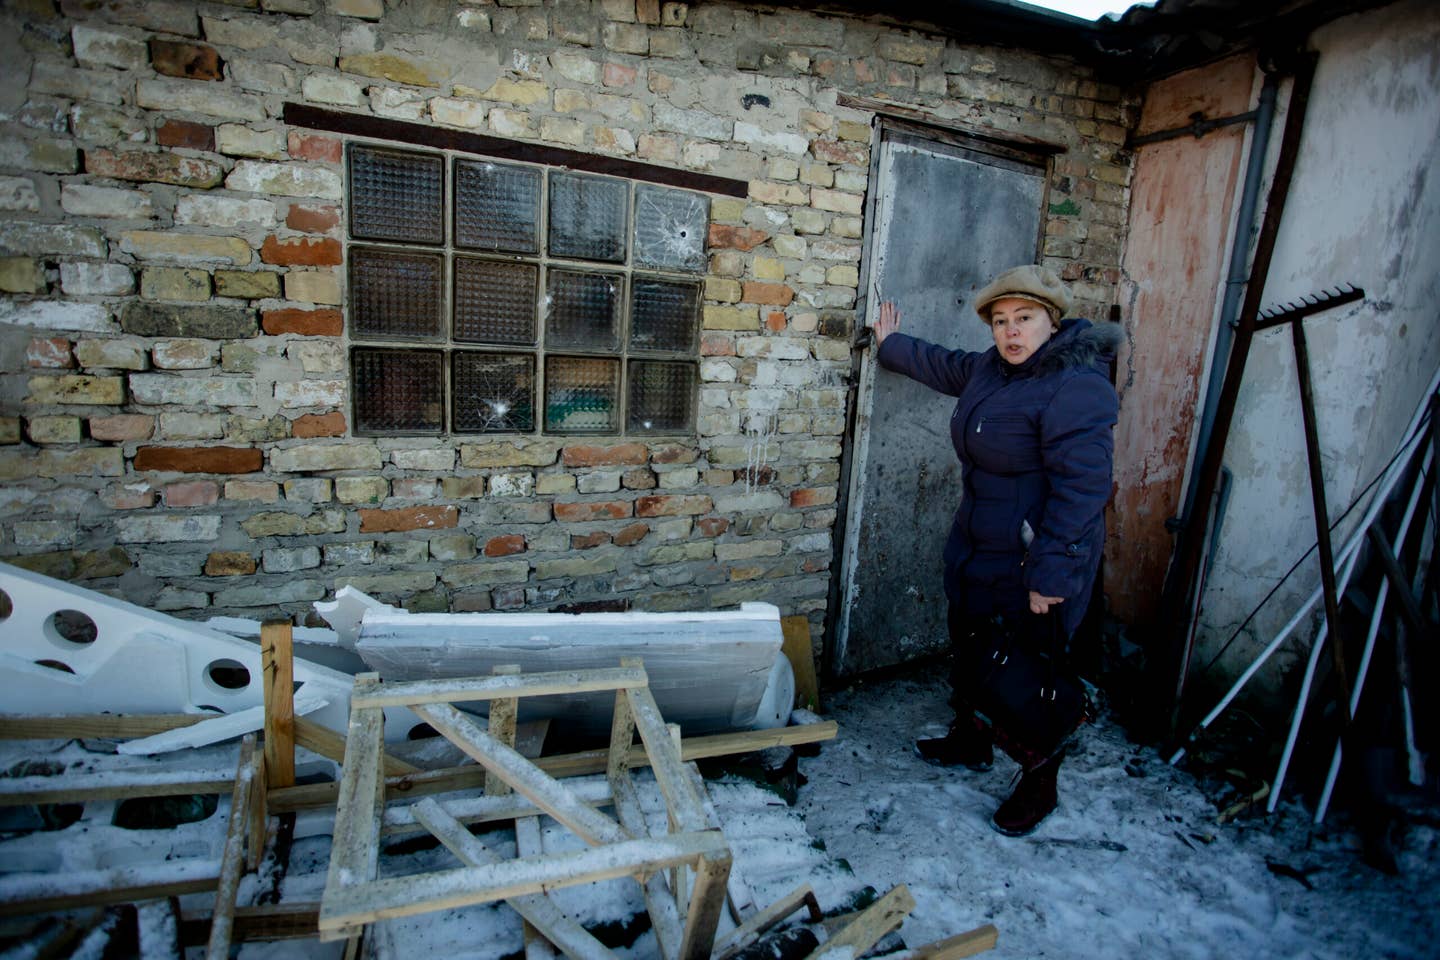 A local woman shows the broken glass in her garage on February 10, 2023, in Kyiv. (Photo by Yan Dobronosov/Global Images Ukraine via Getty Images)